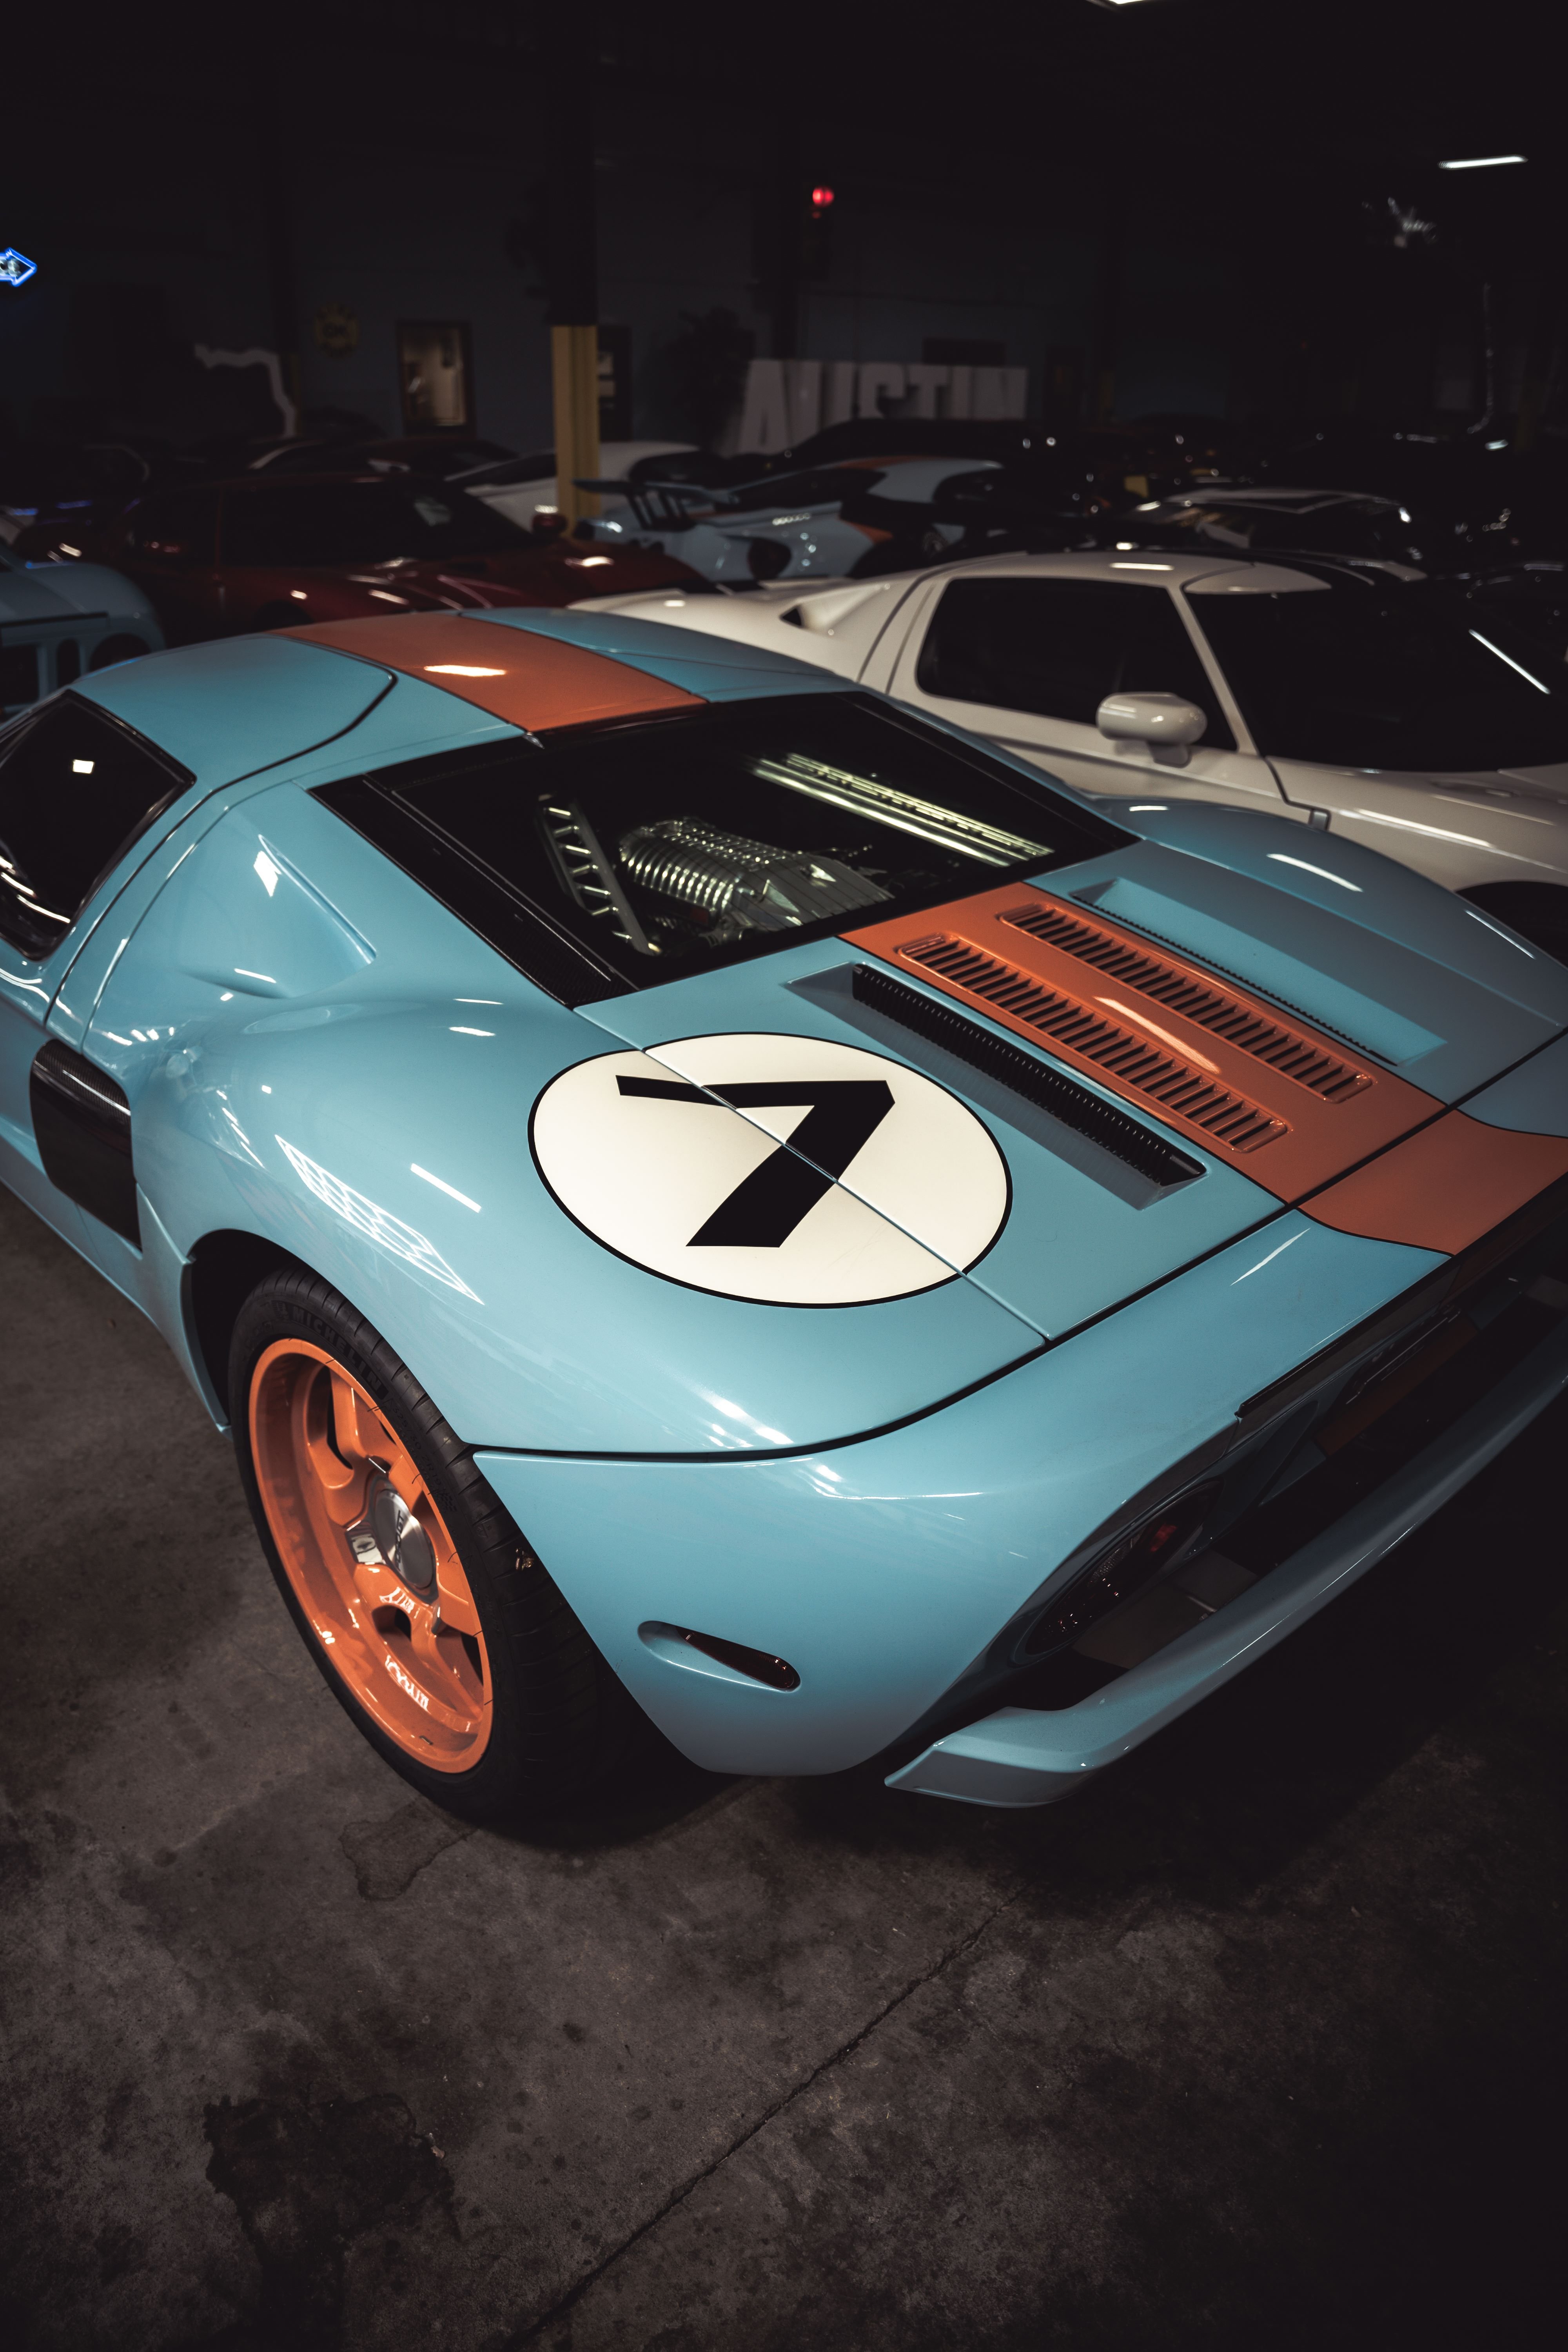 Heritage Gulf Ford GT at Petrol Lounge in Austin, TX.